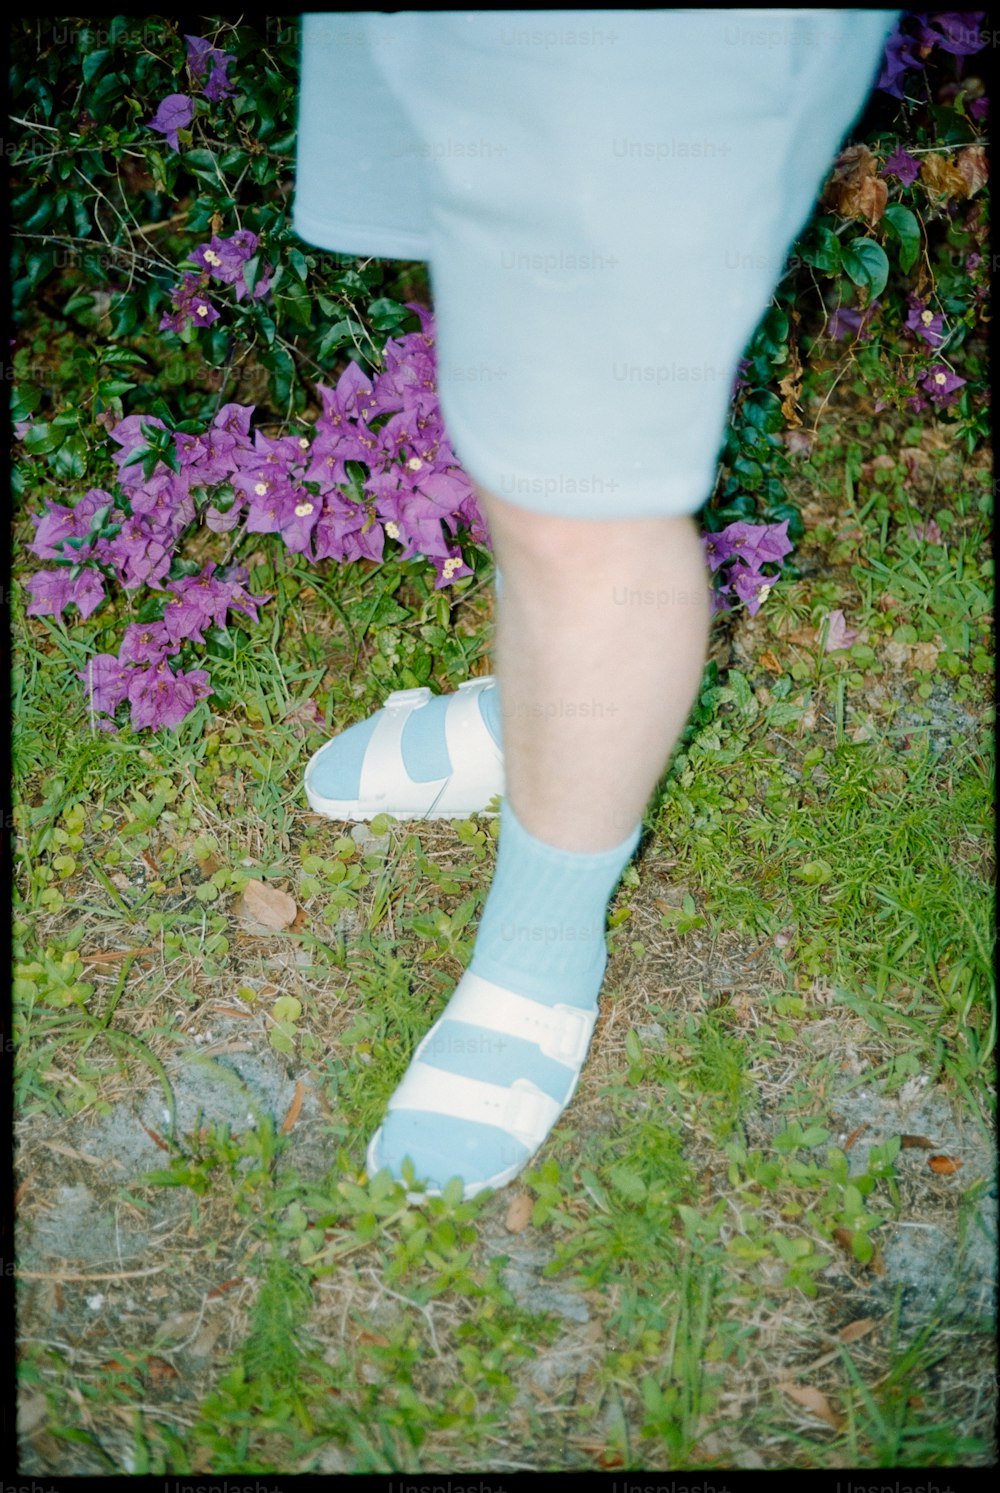 a person wearing blue and white socks standing in the grass